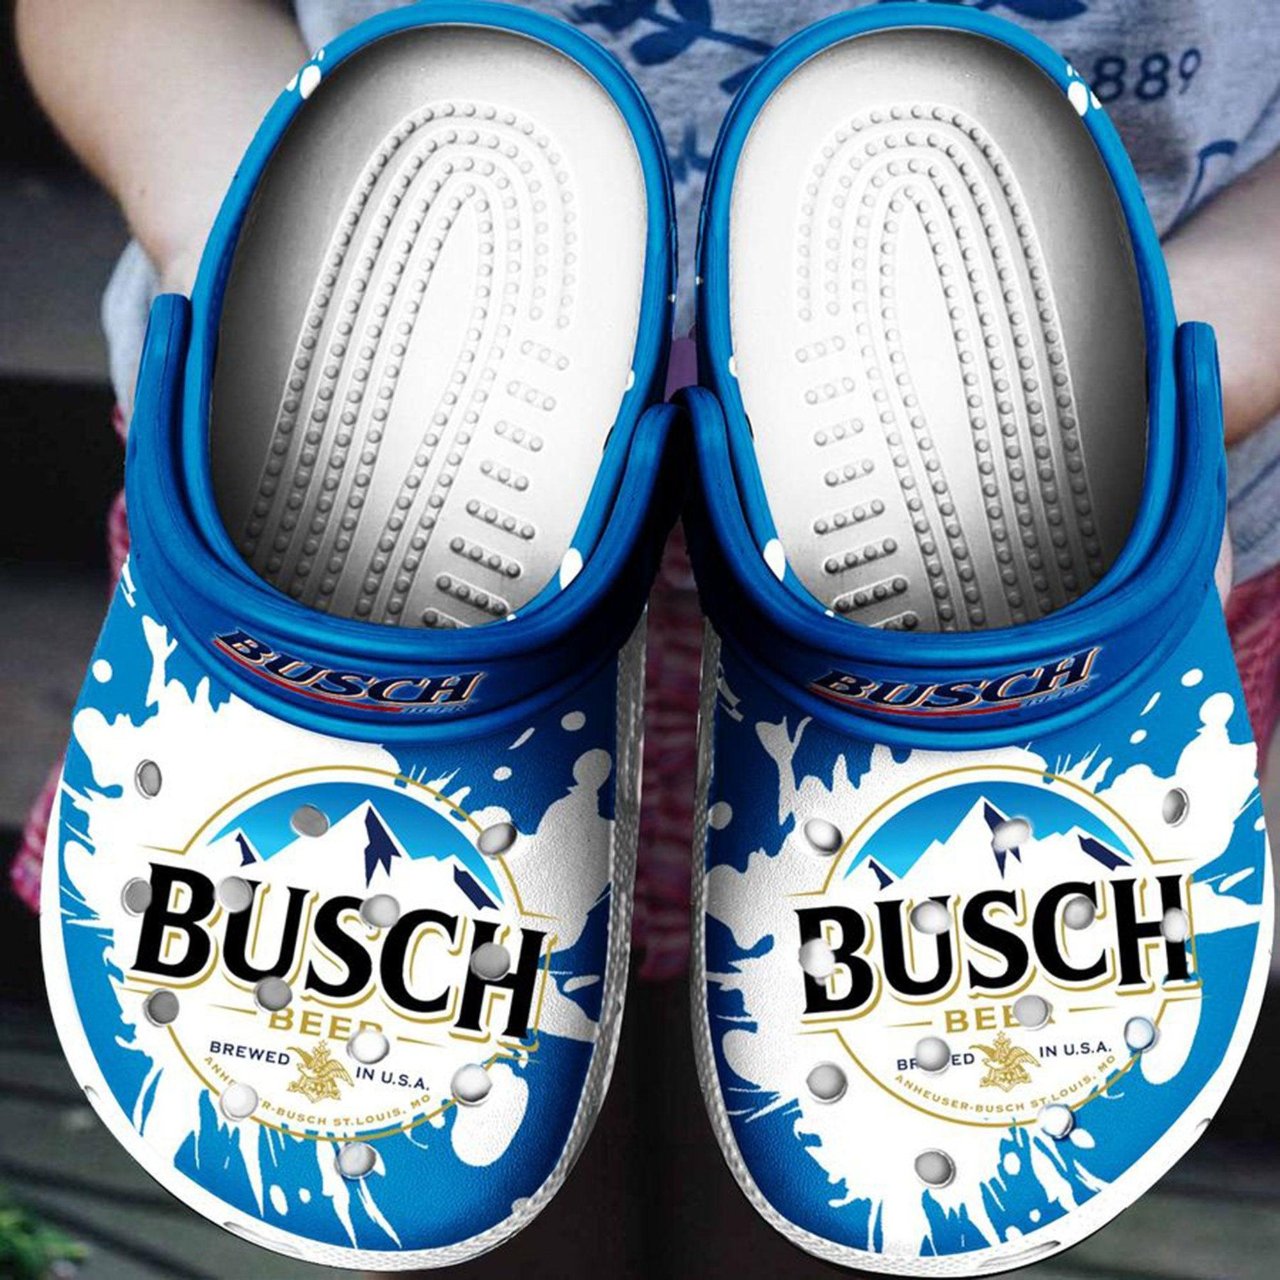 Busch beer clog shoes - Betiti Store